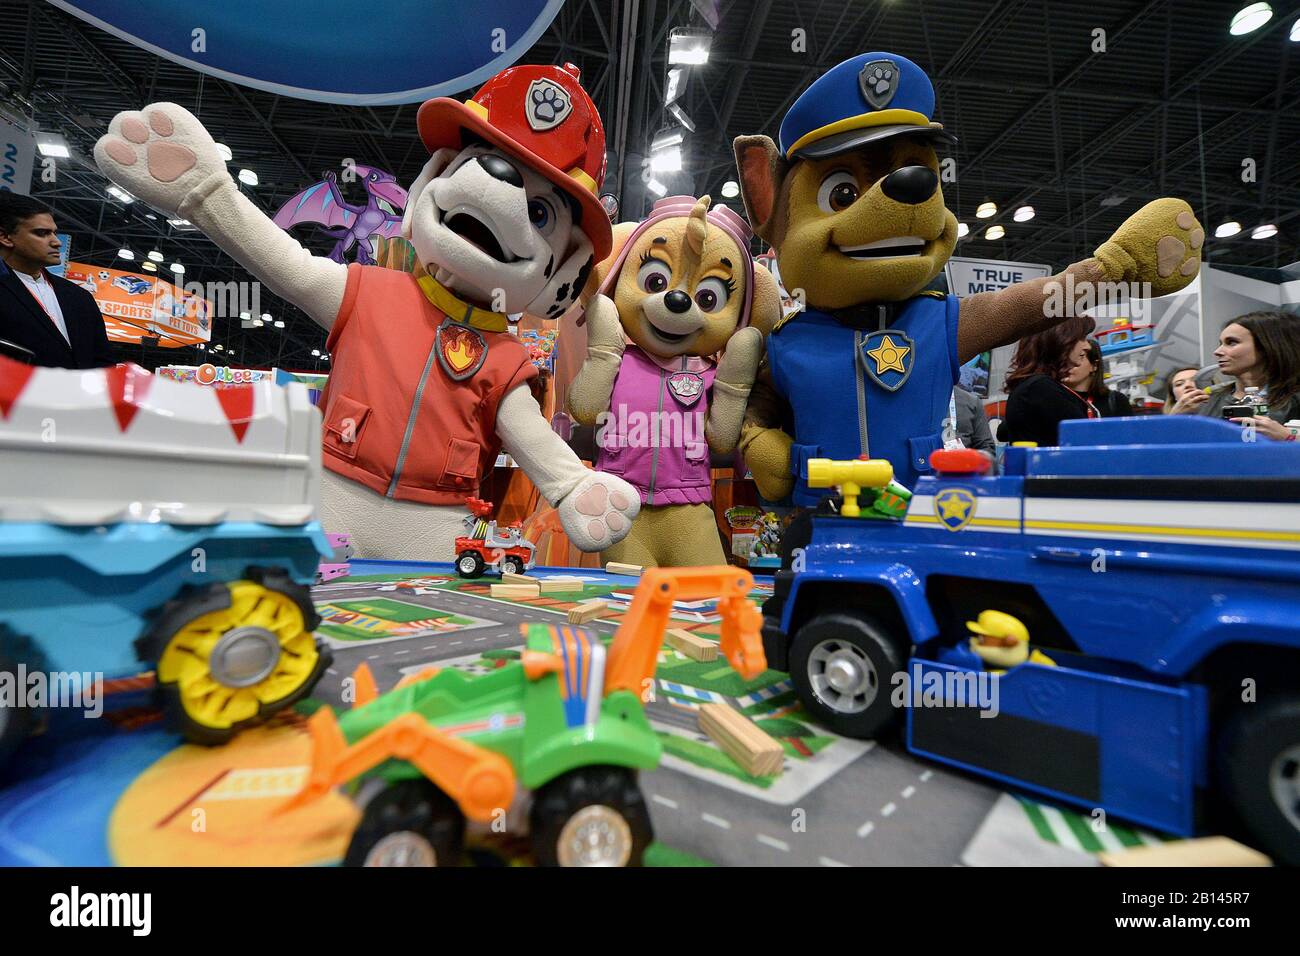 Costumed characters Marshal, Sky and Chase from the children's animated  series 'Paw Patrol” interact with customers